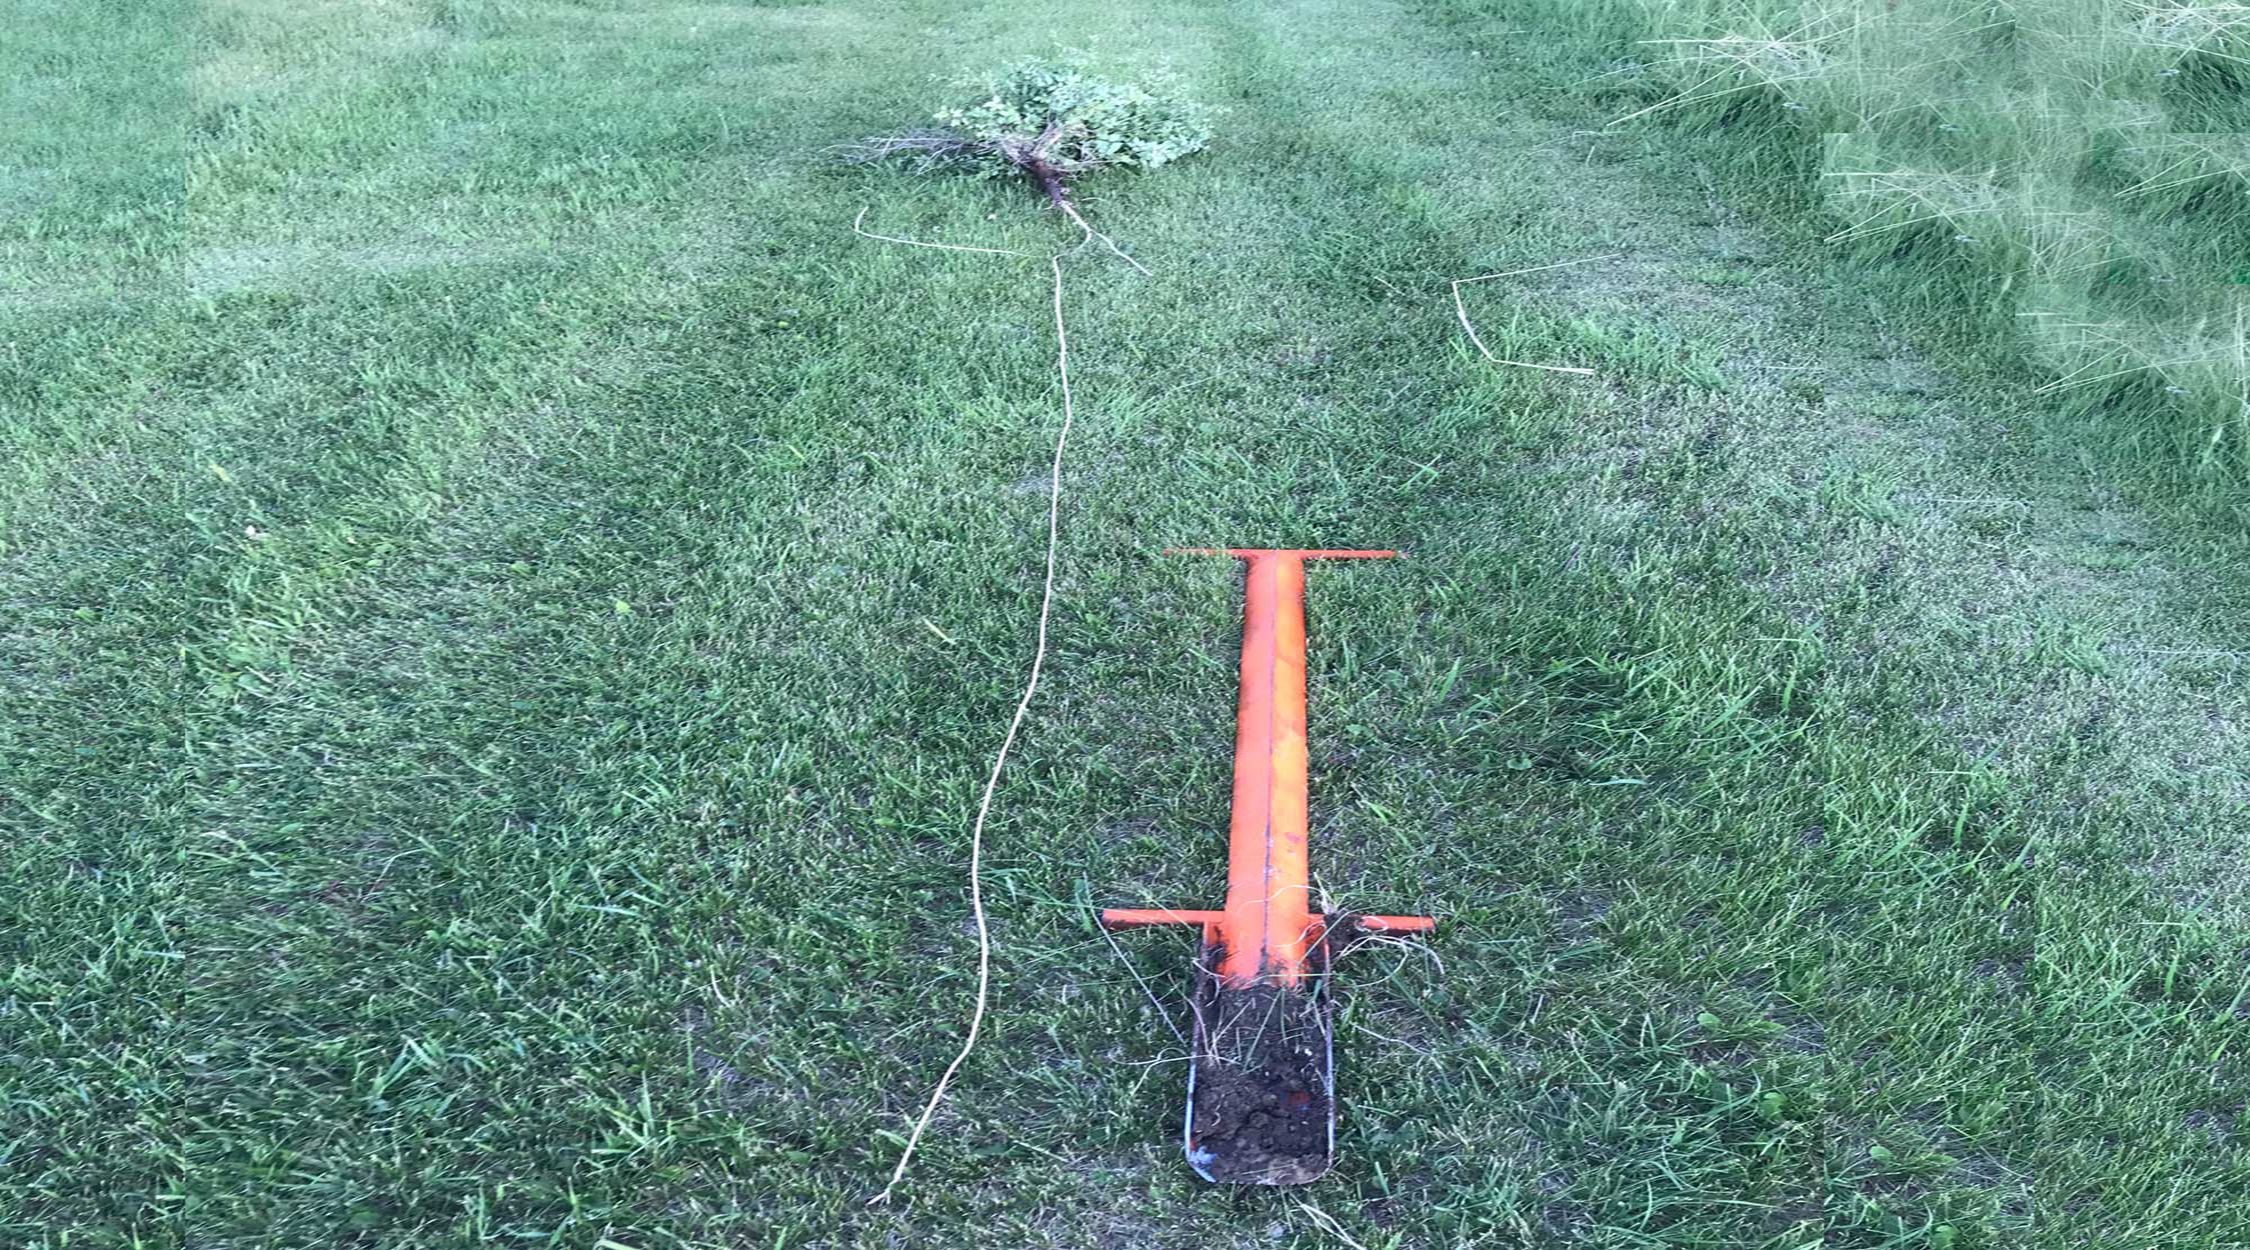 Siberian elm sappling with a tap root extending over 12 feet into the soil.